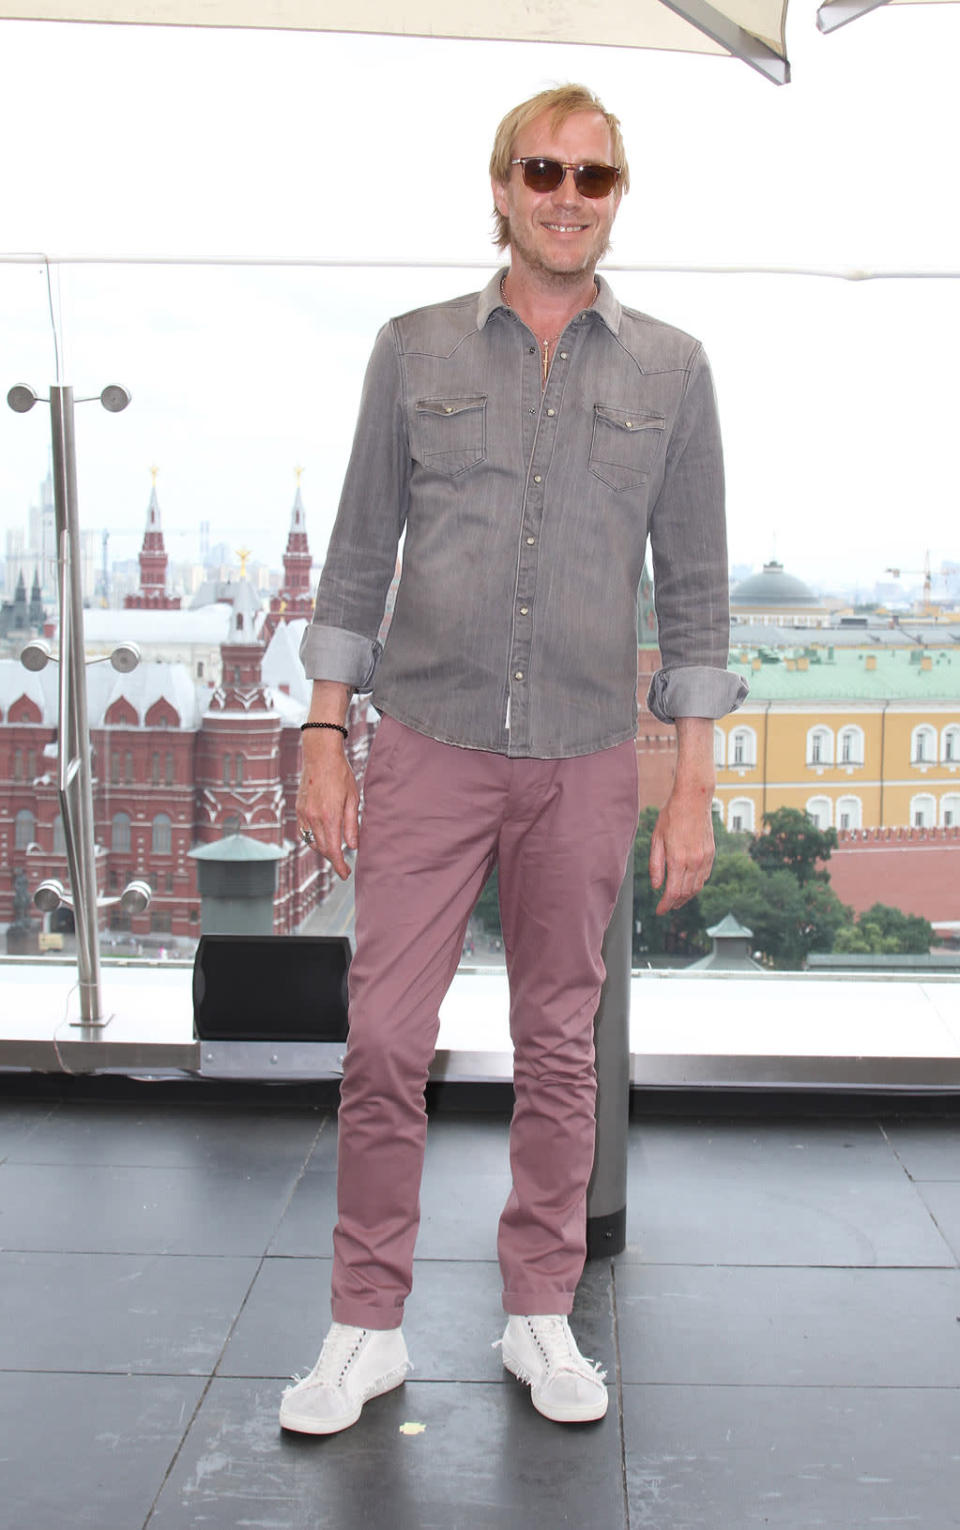 Rhys Ifans poses for photo on the roof of Ritz Carlton hotel before 'The Amazing Spider-Man' premiere on June 15, 2012 in Moscow, Russia.